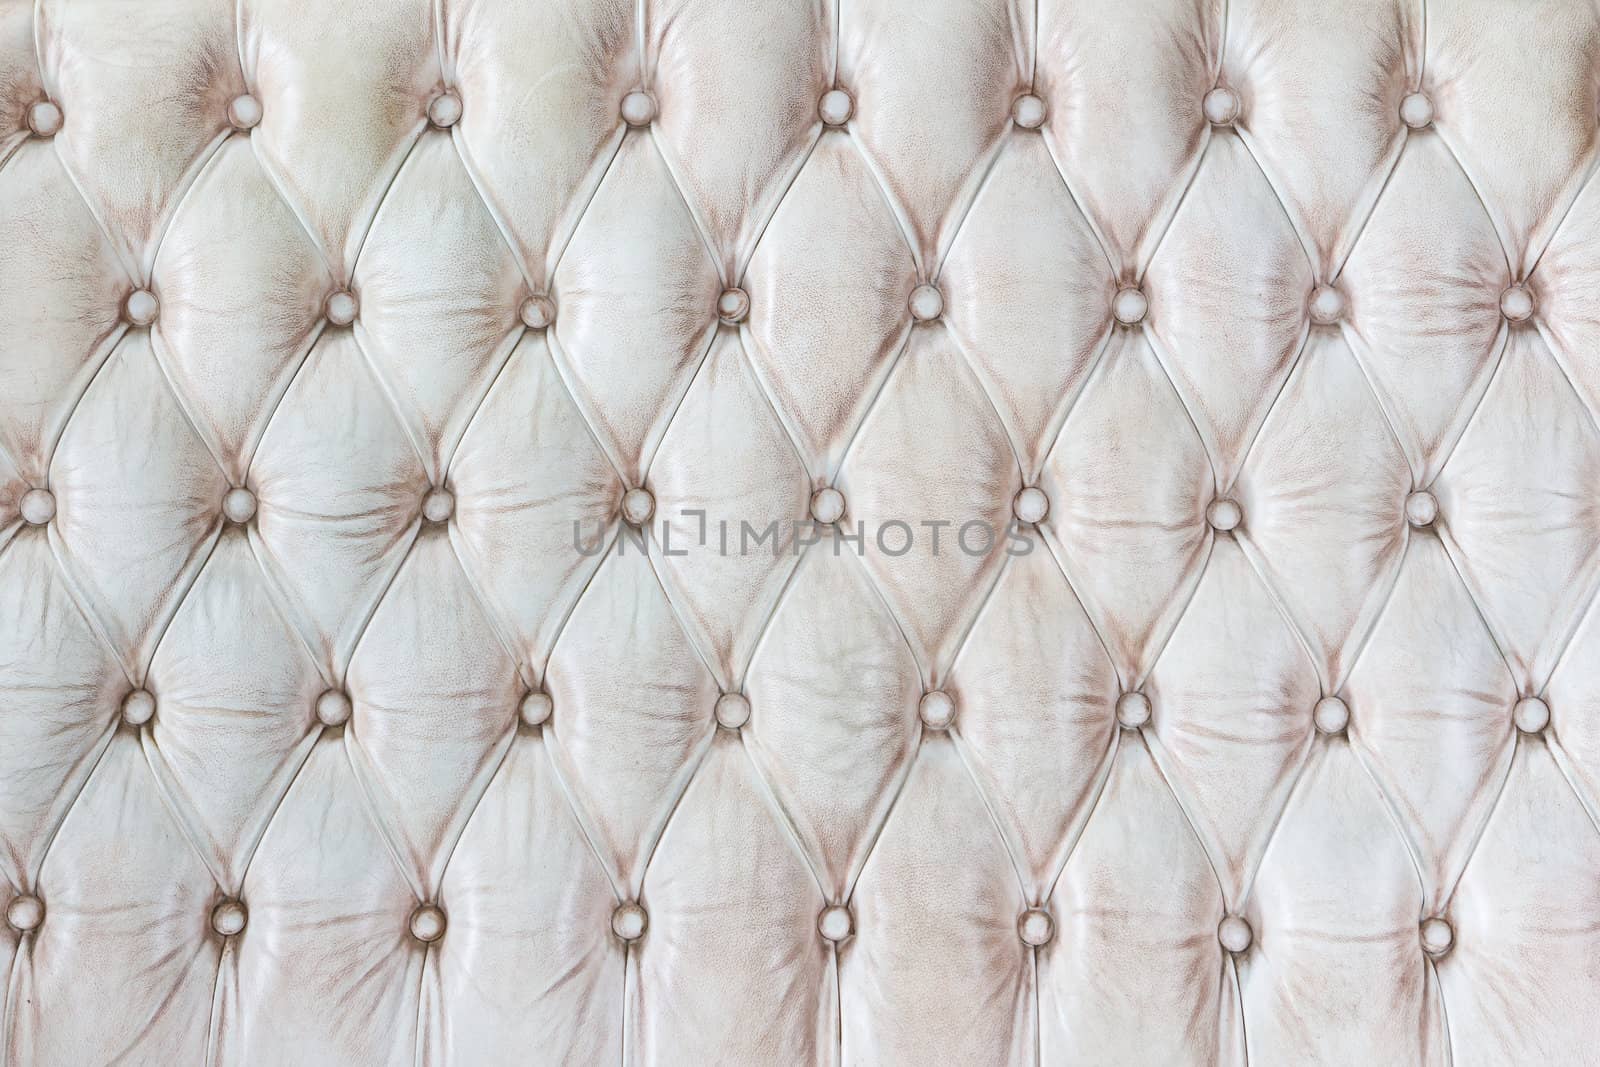 white leather texture  by tungphoto